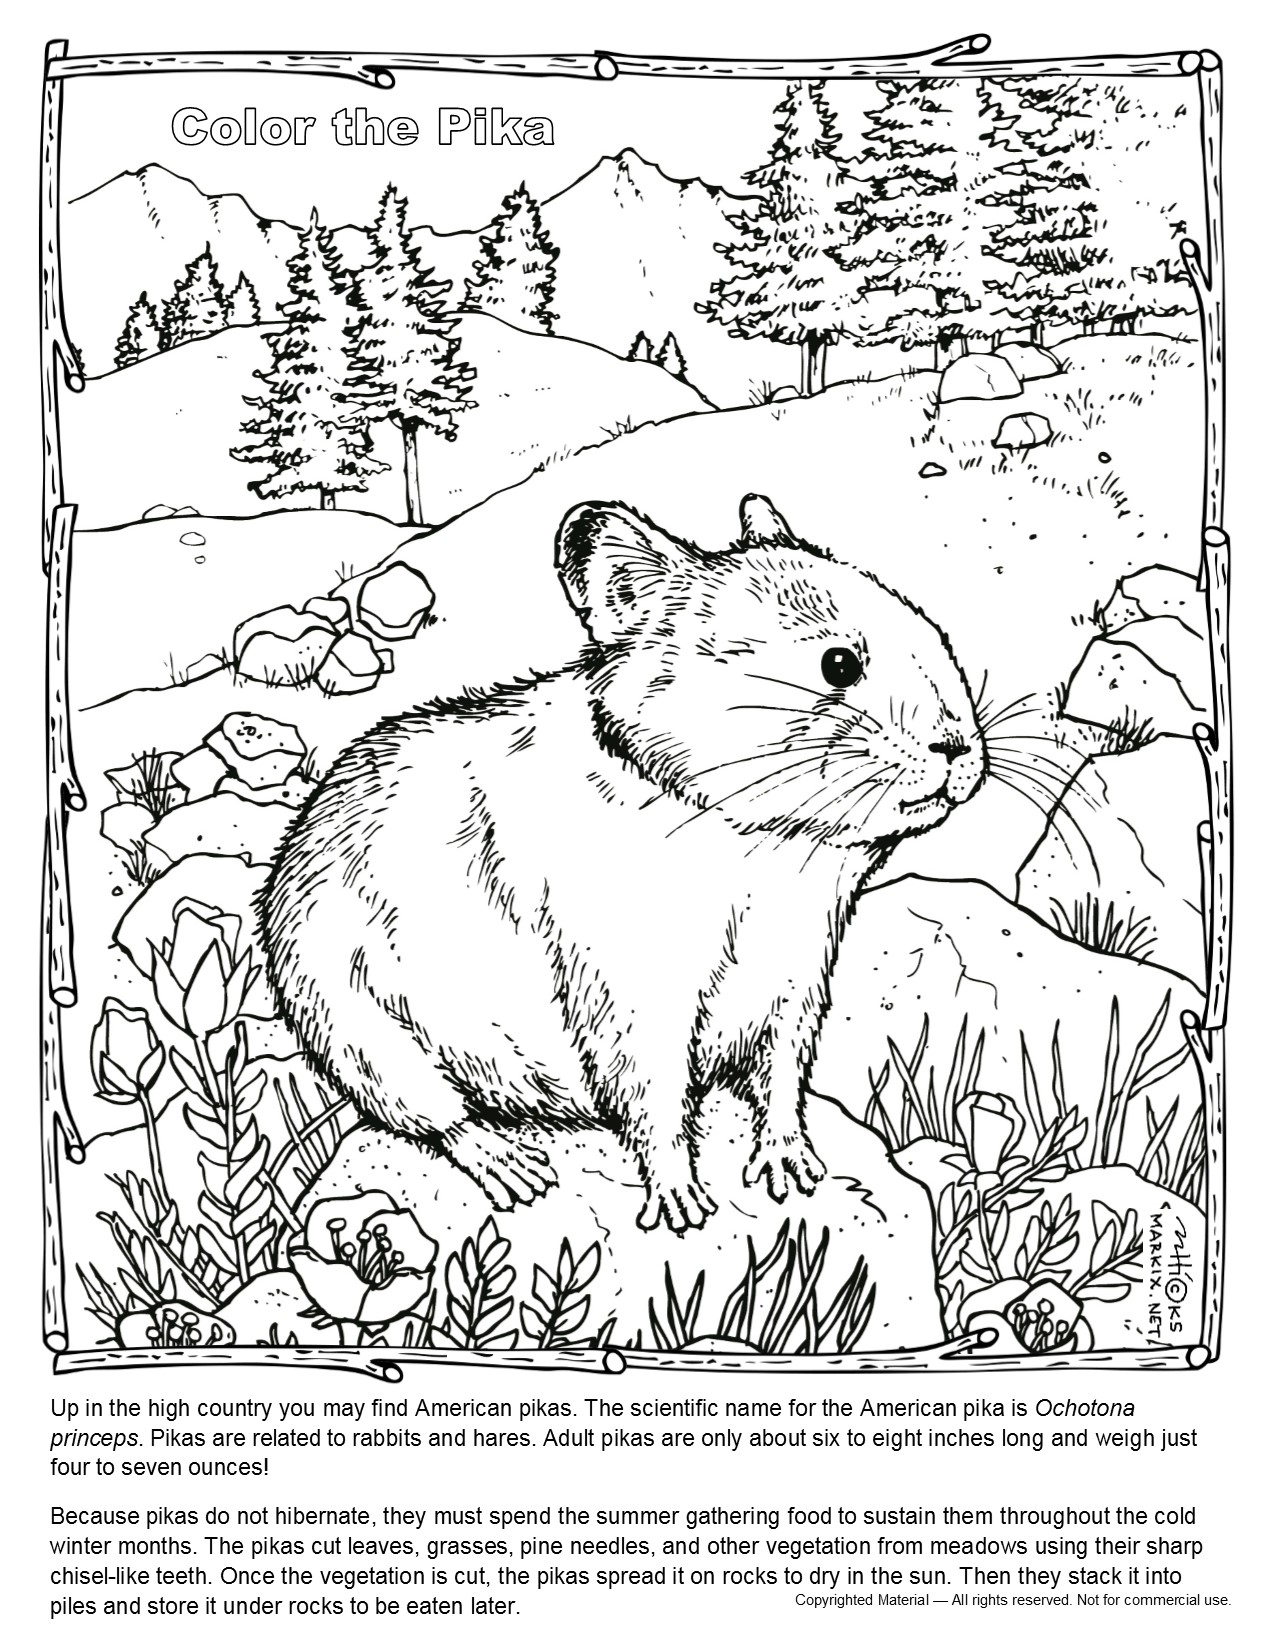 Pika coloring Page. Up in the mountains you may find American pikas. Pikas are related to rabbits and hares. Adult pikas are only about six to eight inches long and weigh just four to seven ounces!